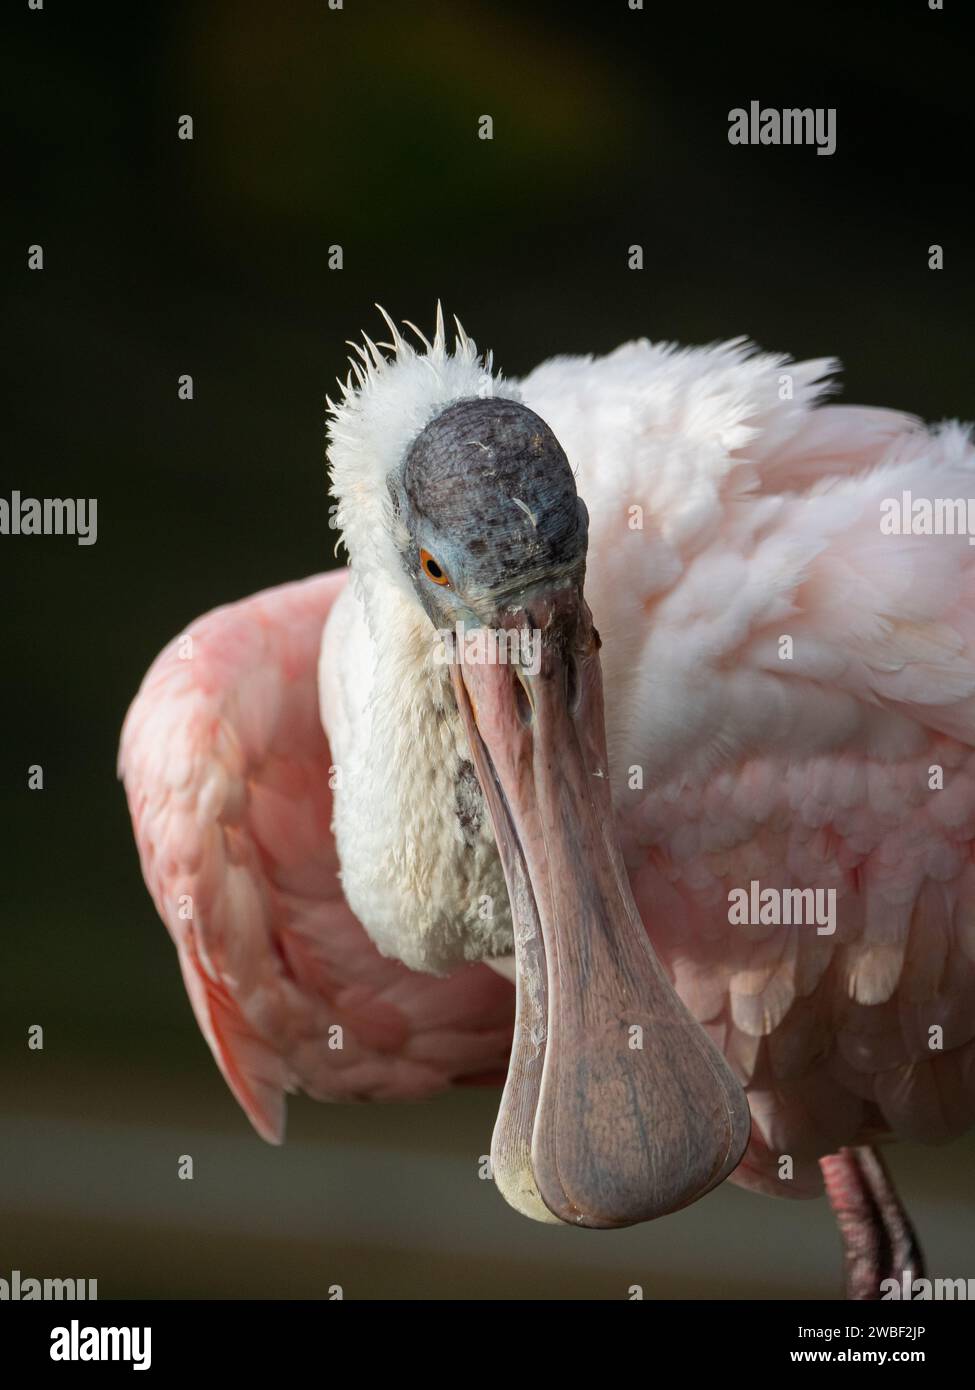 A close-up image of a bird with its beak wide open, facing the camera with a curious expression Stock Photo